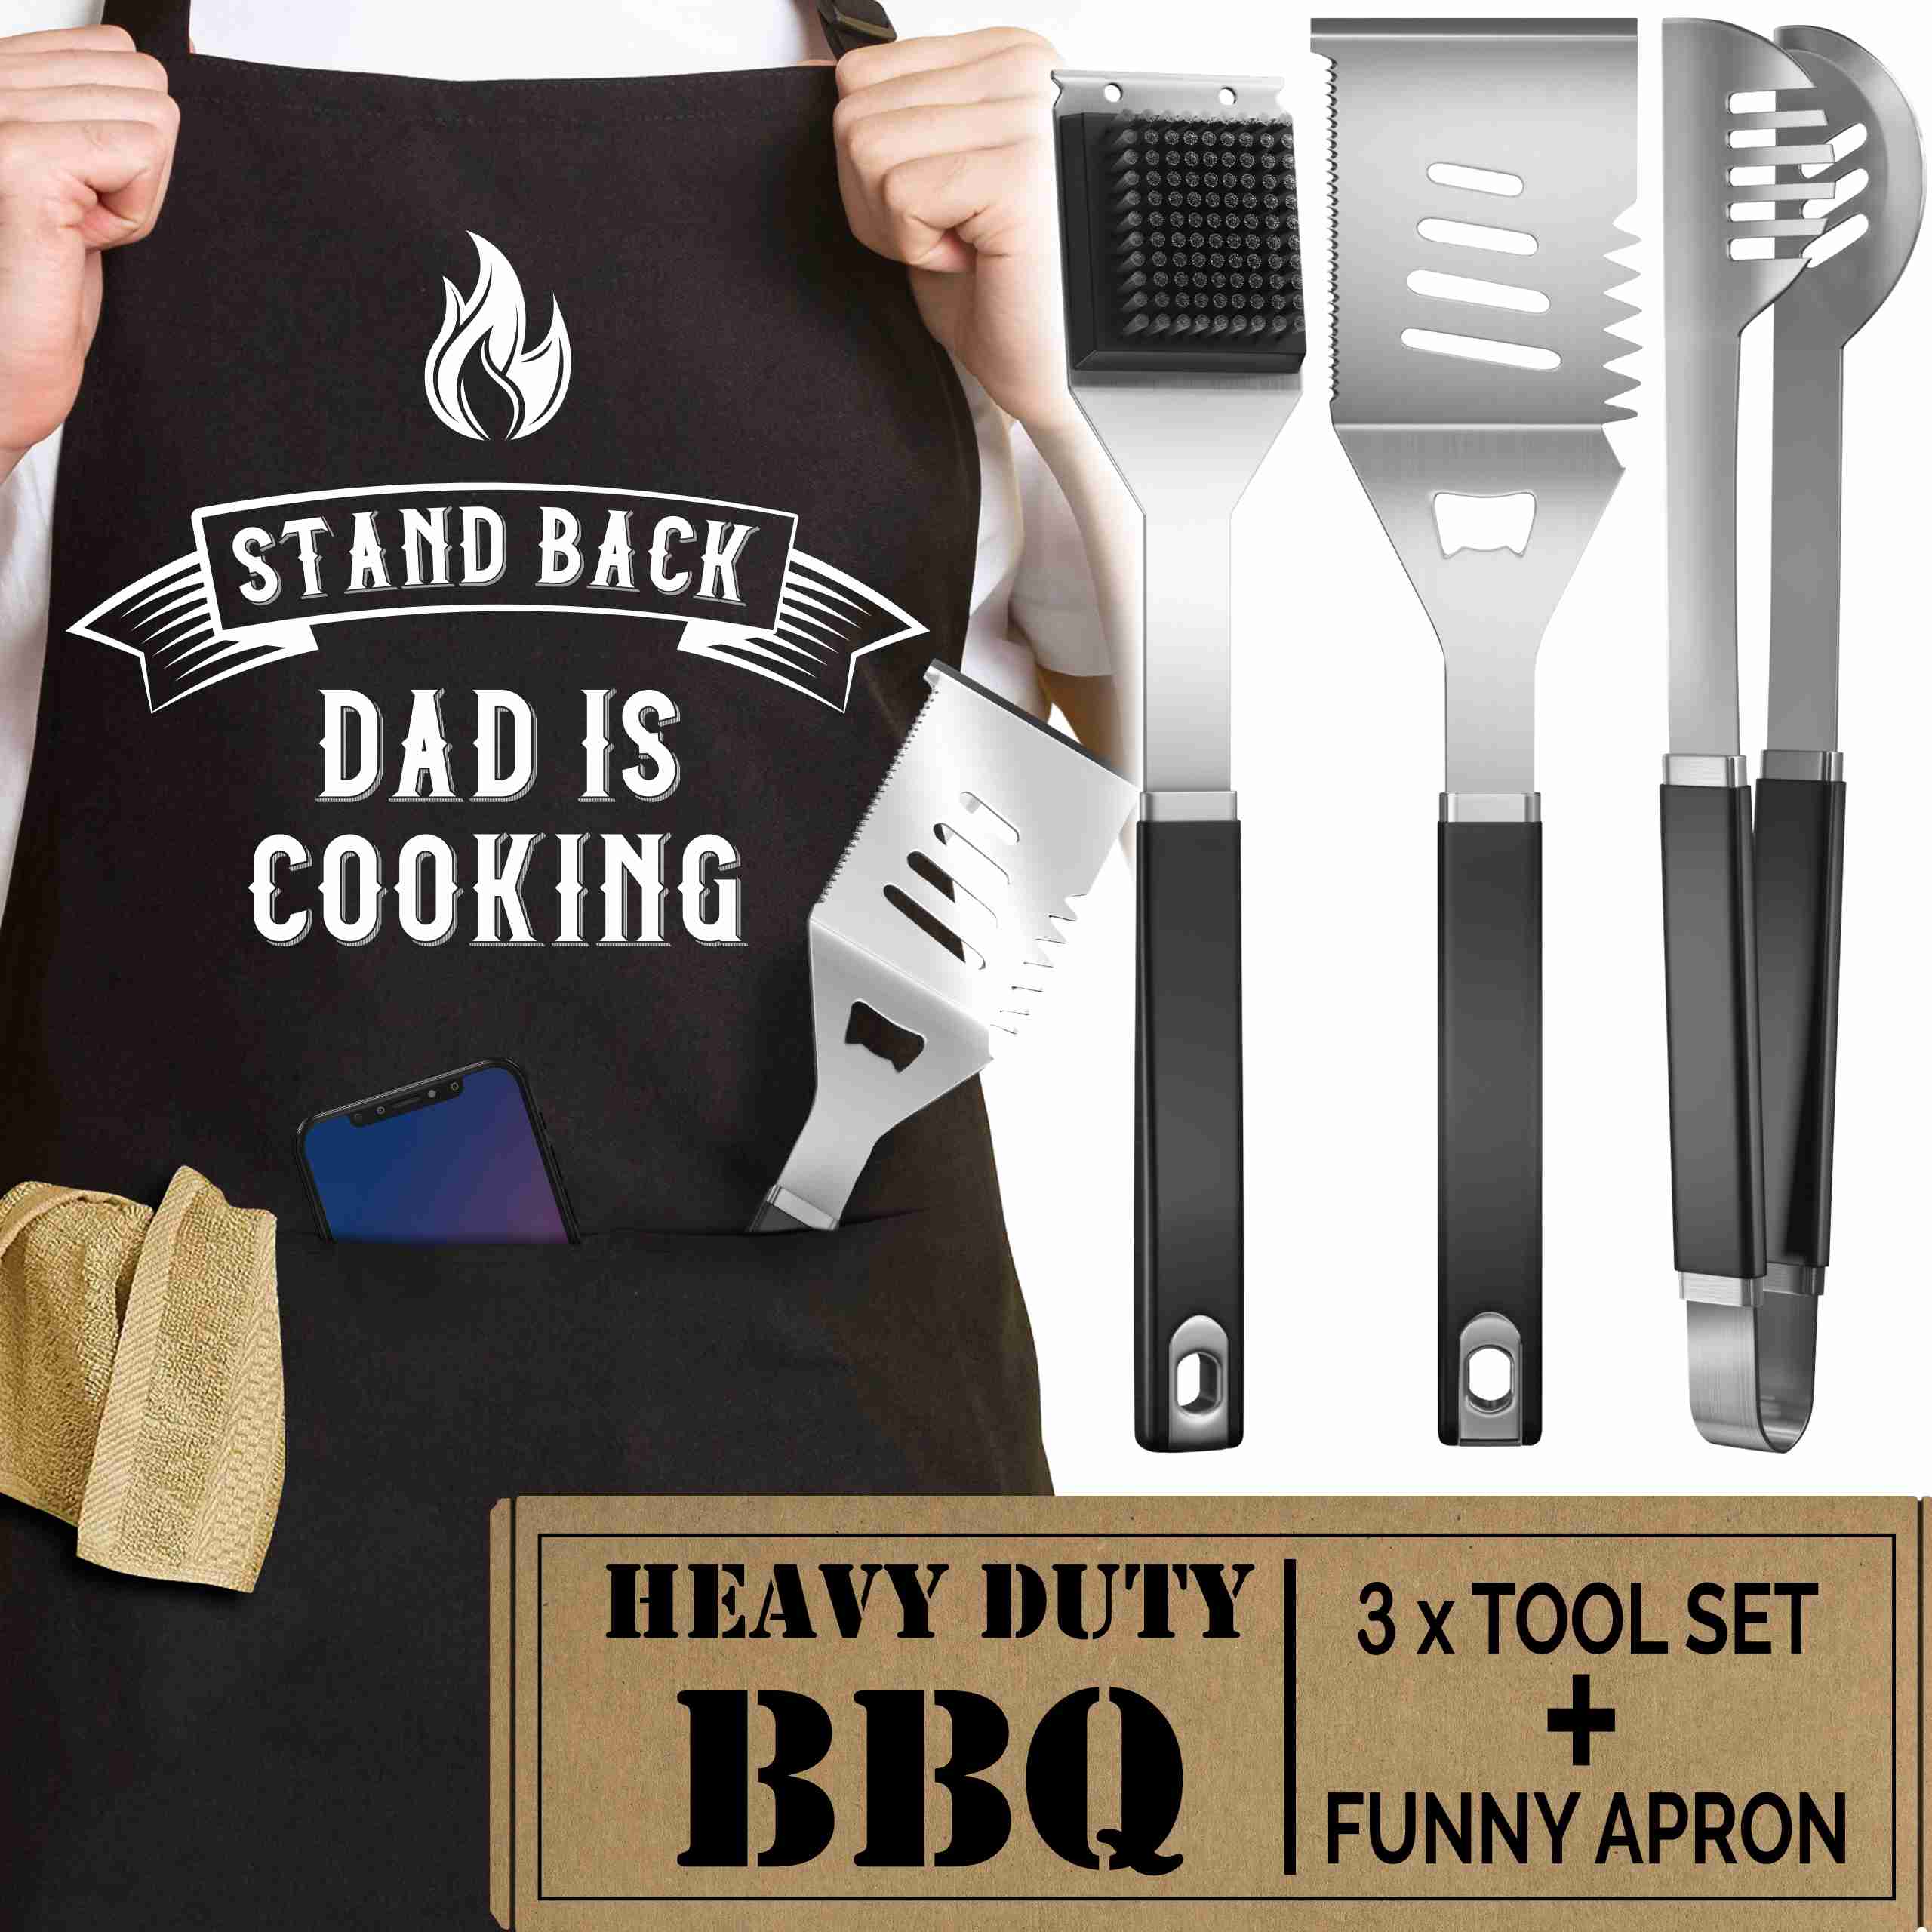 dad-gifts with cash back rebate